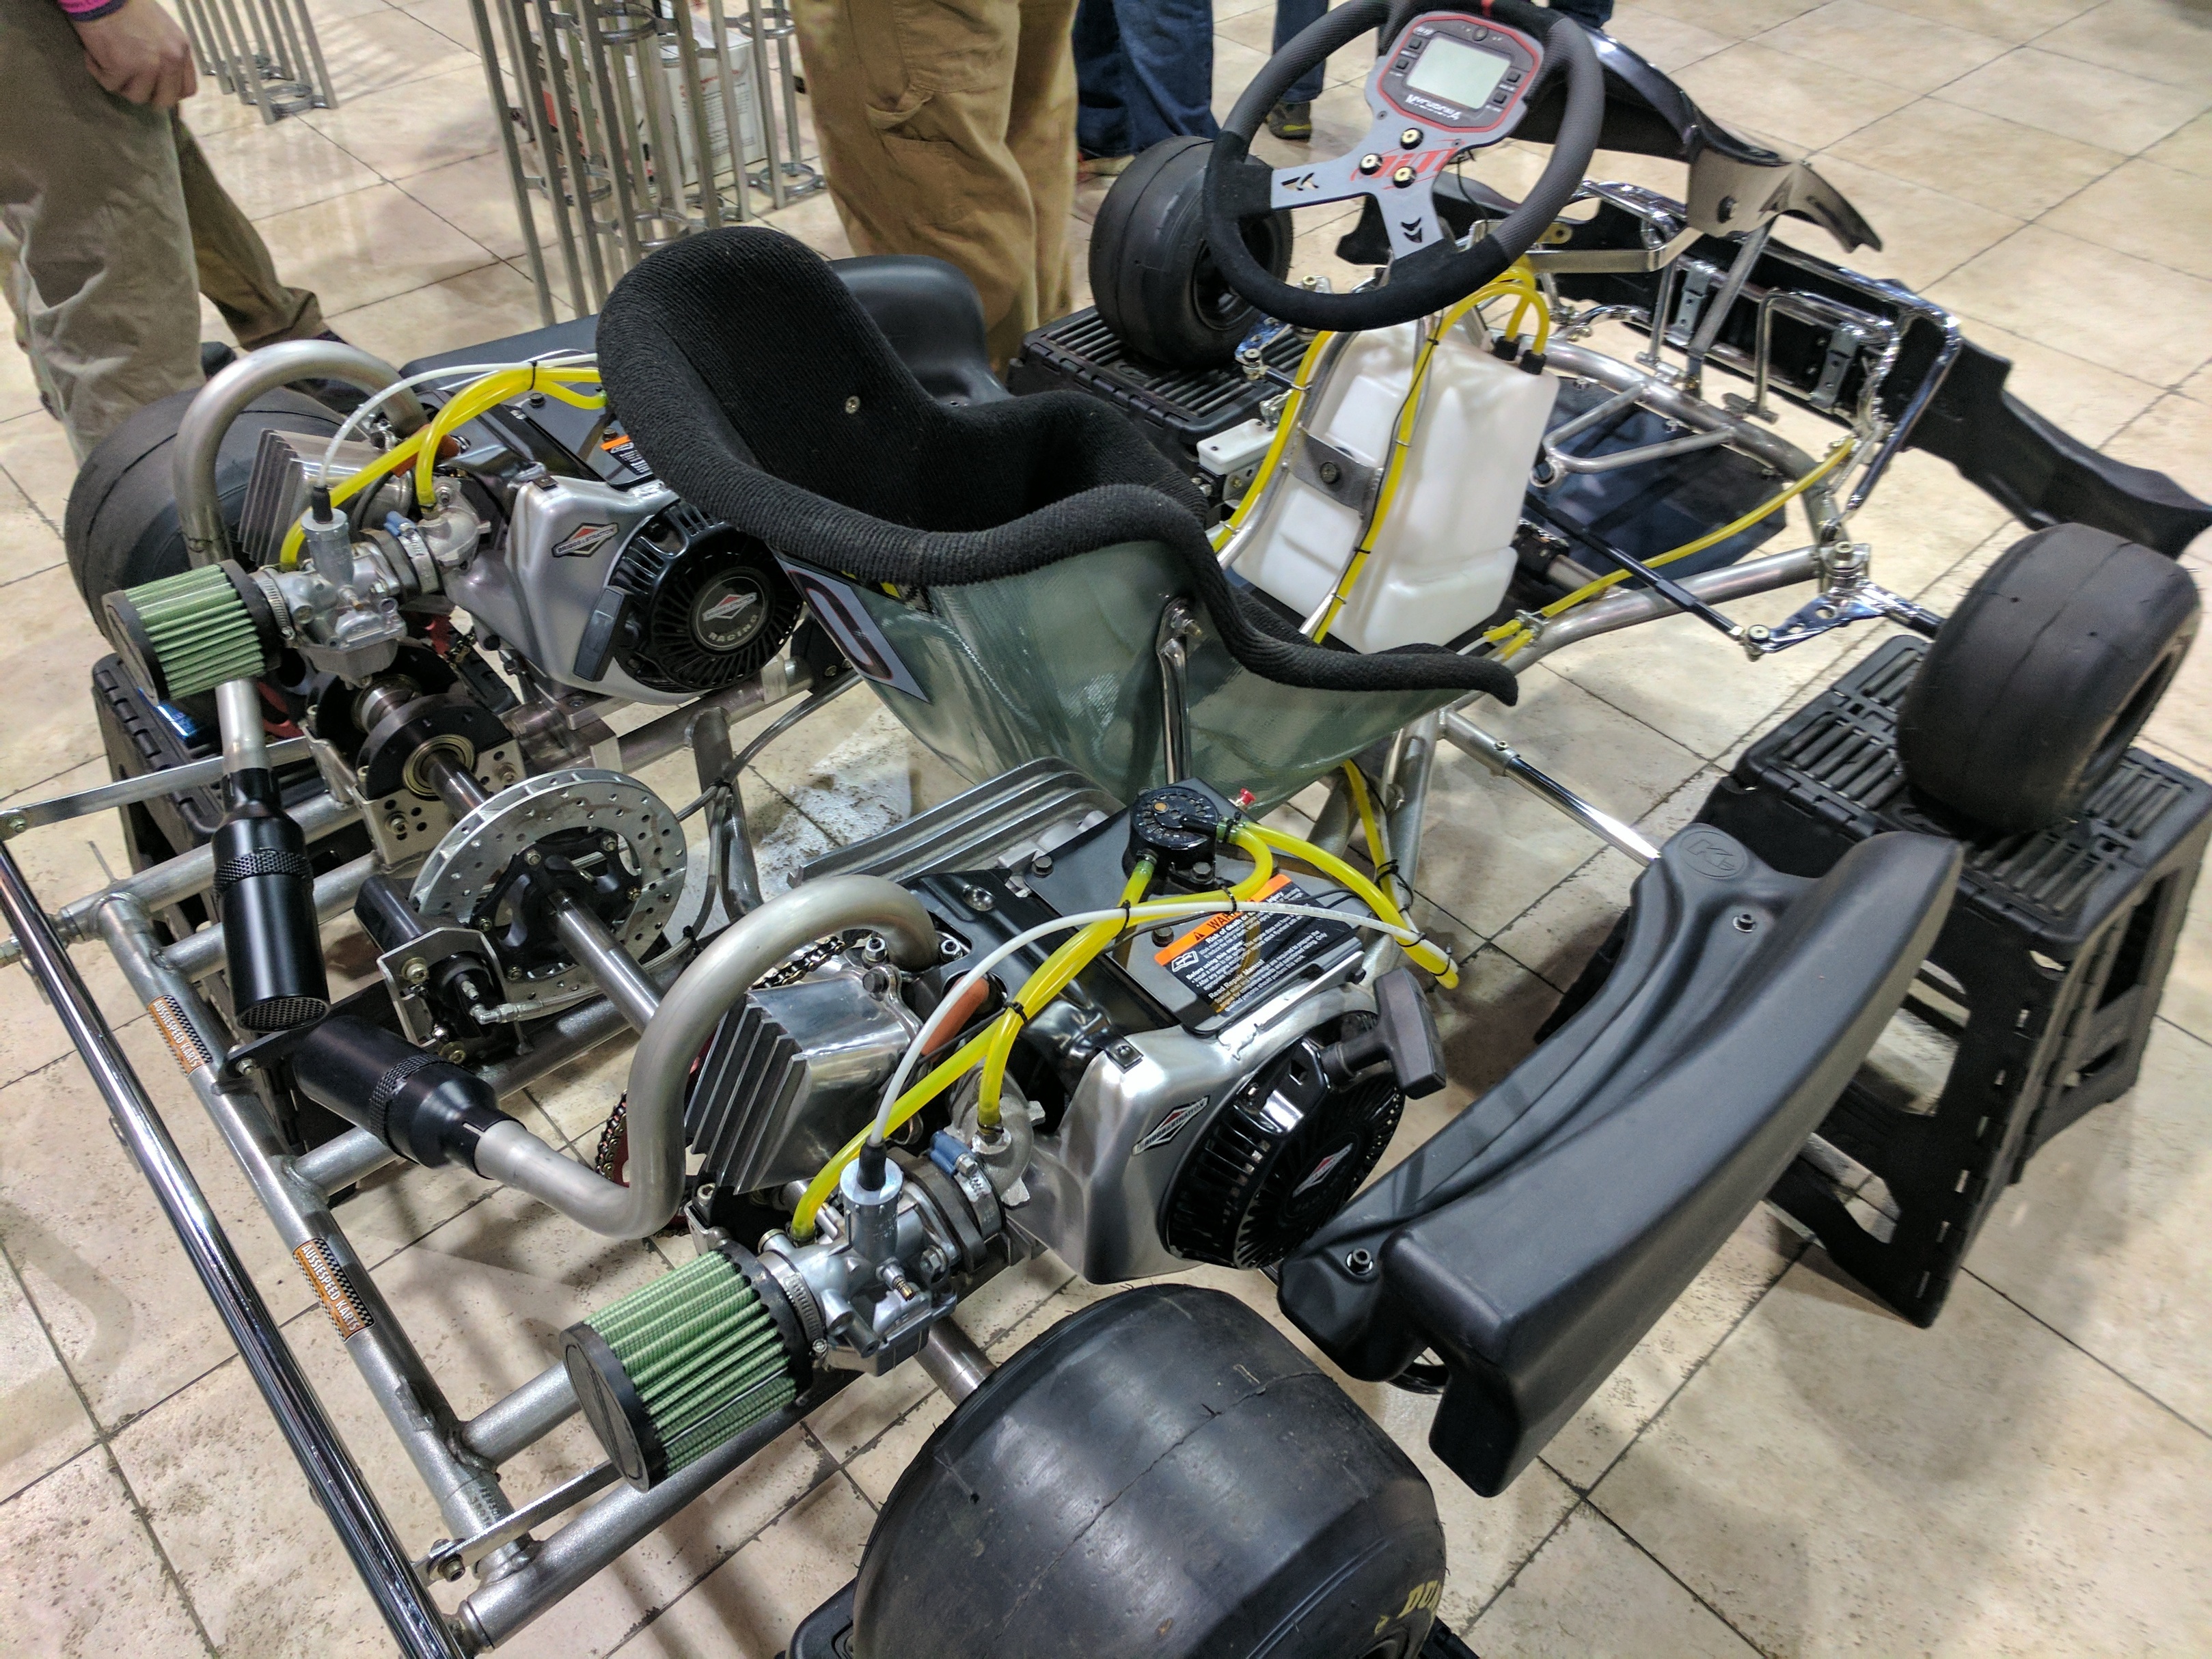 Multi (Dual and more) Engine Karts - GoKart Projects